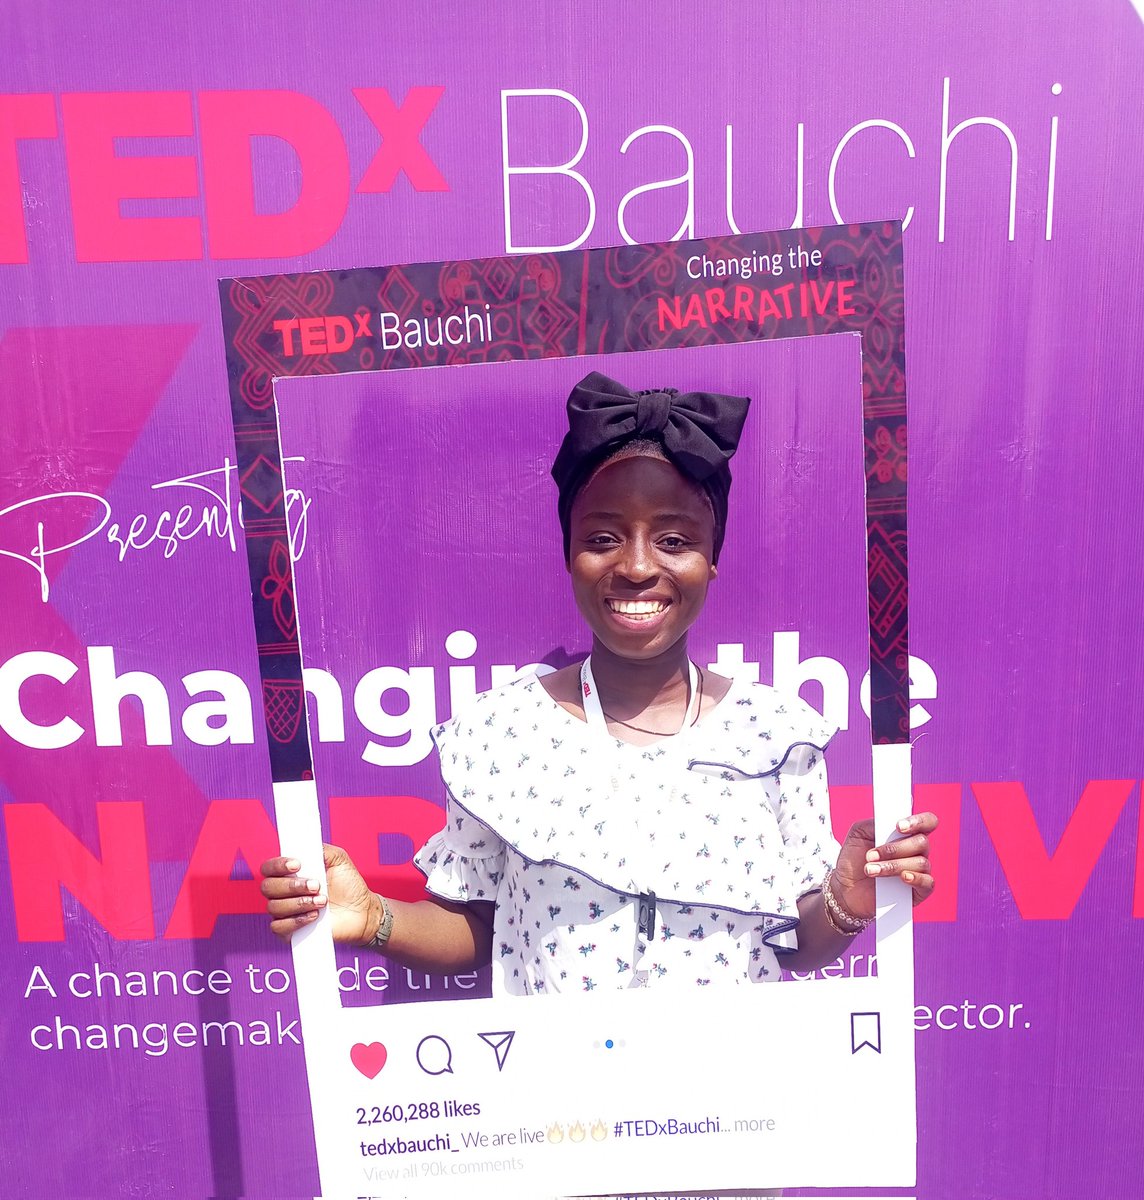 TEDx Bauchi 😊😊
I am committed to creating wealth
Dare to dream beyond what society may expect of you- Ali Gombe
#changingthenarrative
#TEDxBauchi